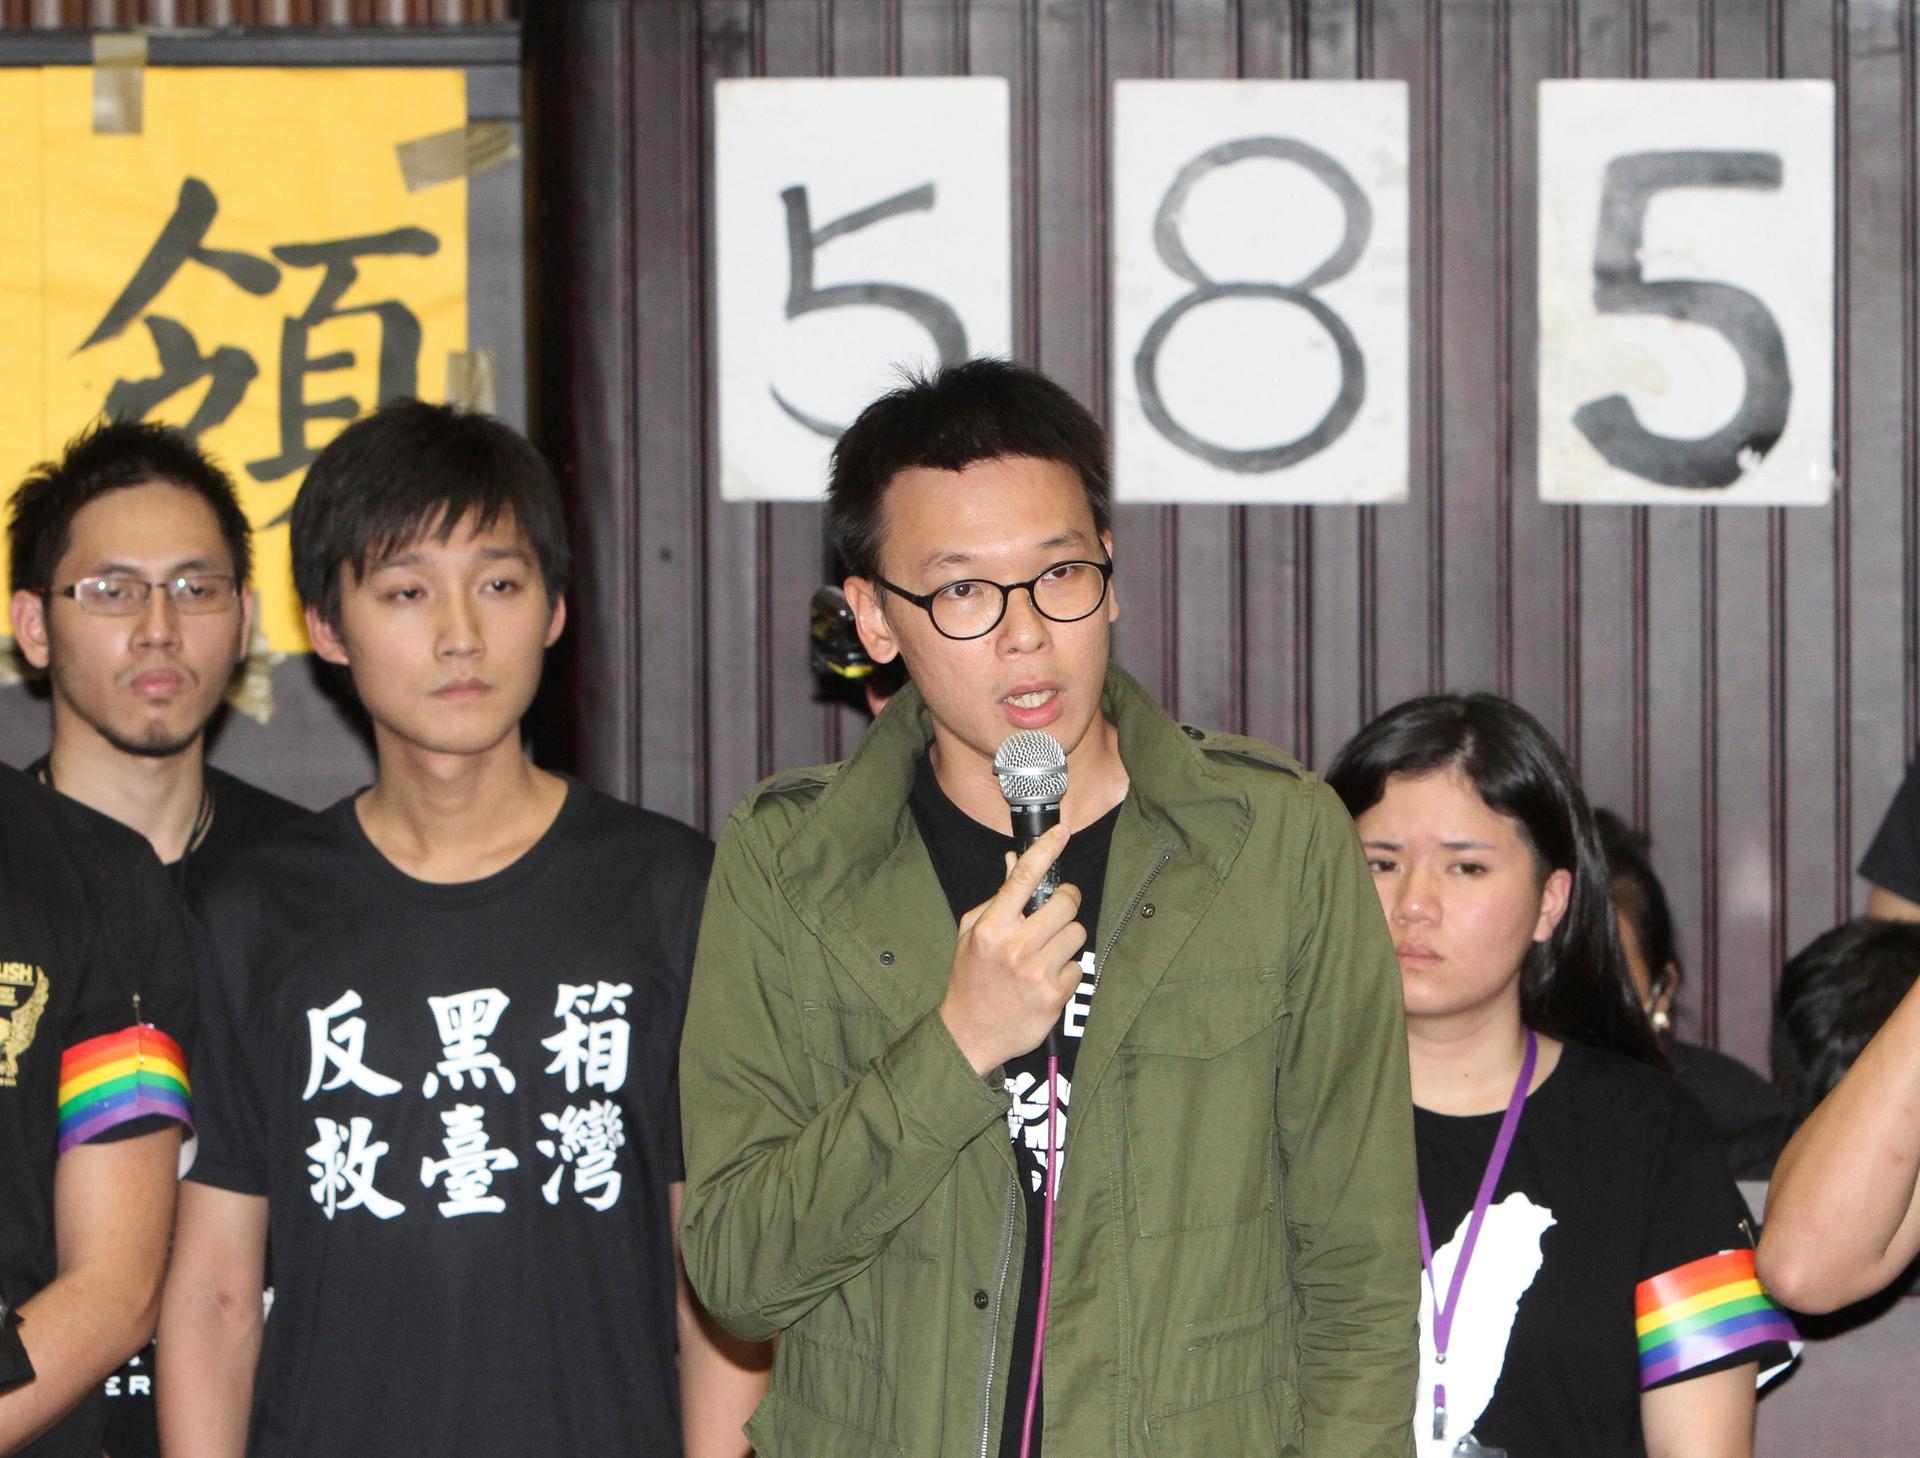 Lin Fei-fan, center, the leader of student protesters demonstrating against a trade pact with China, speaks to the media during a press conference on the occupied legislature floor in Taipei, Taiwan, Thursday, April 10, 2014. 